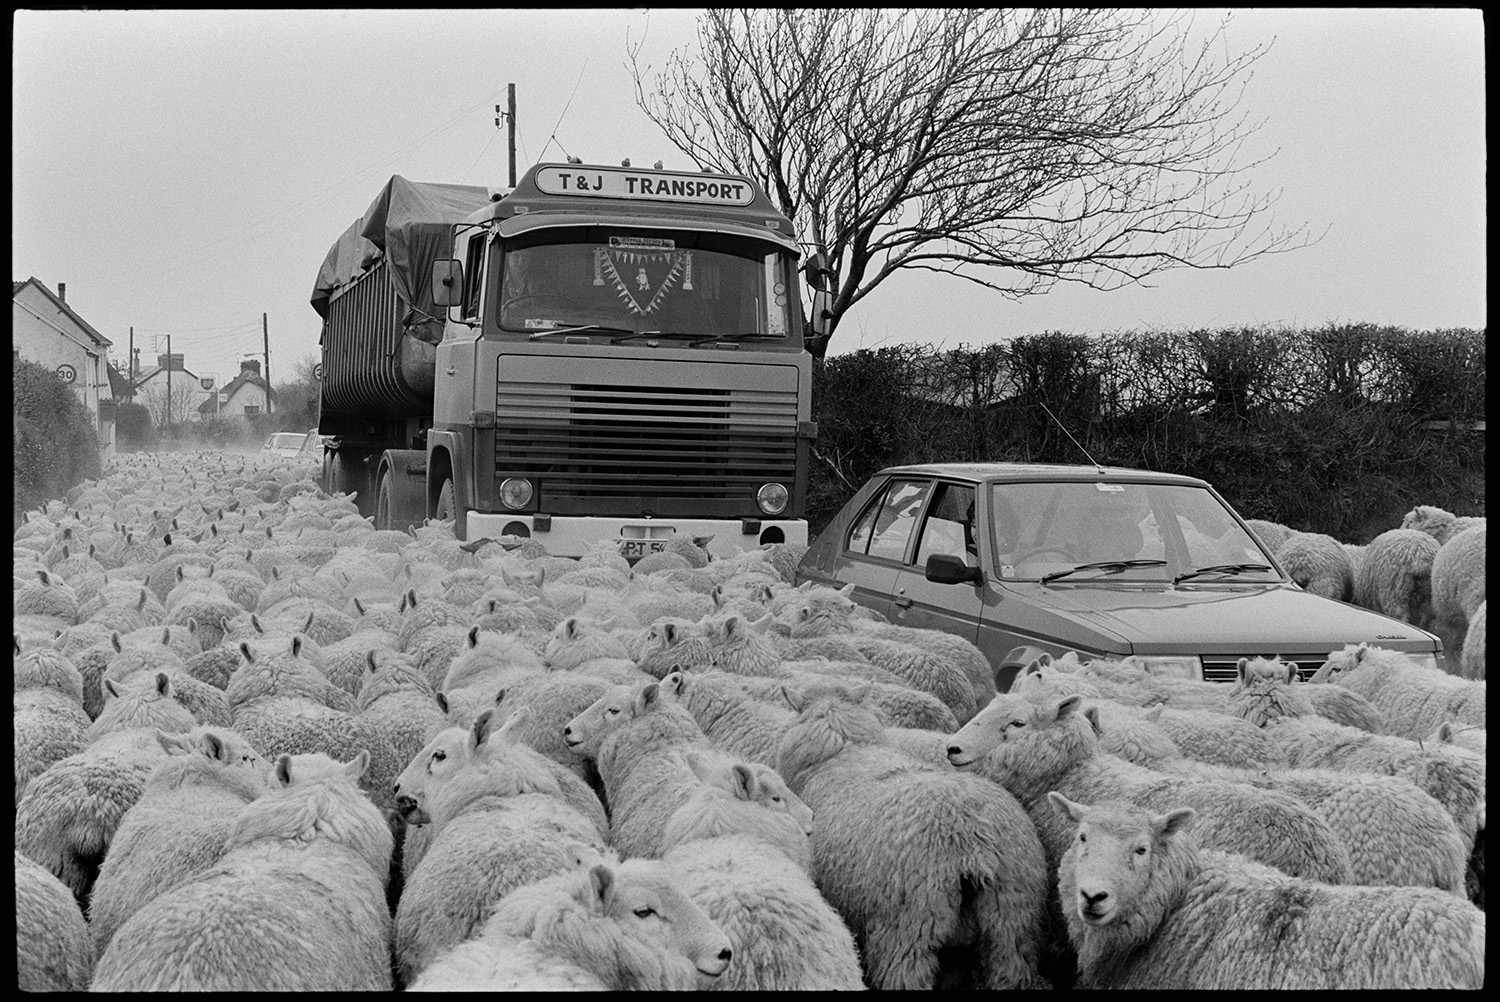 Flock of sheep in road and going through village, lorry waiting surrounded. 
[A lorry and a car surrounded by sheep which are being driven along a road in Beaford.]